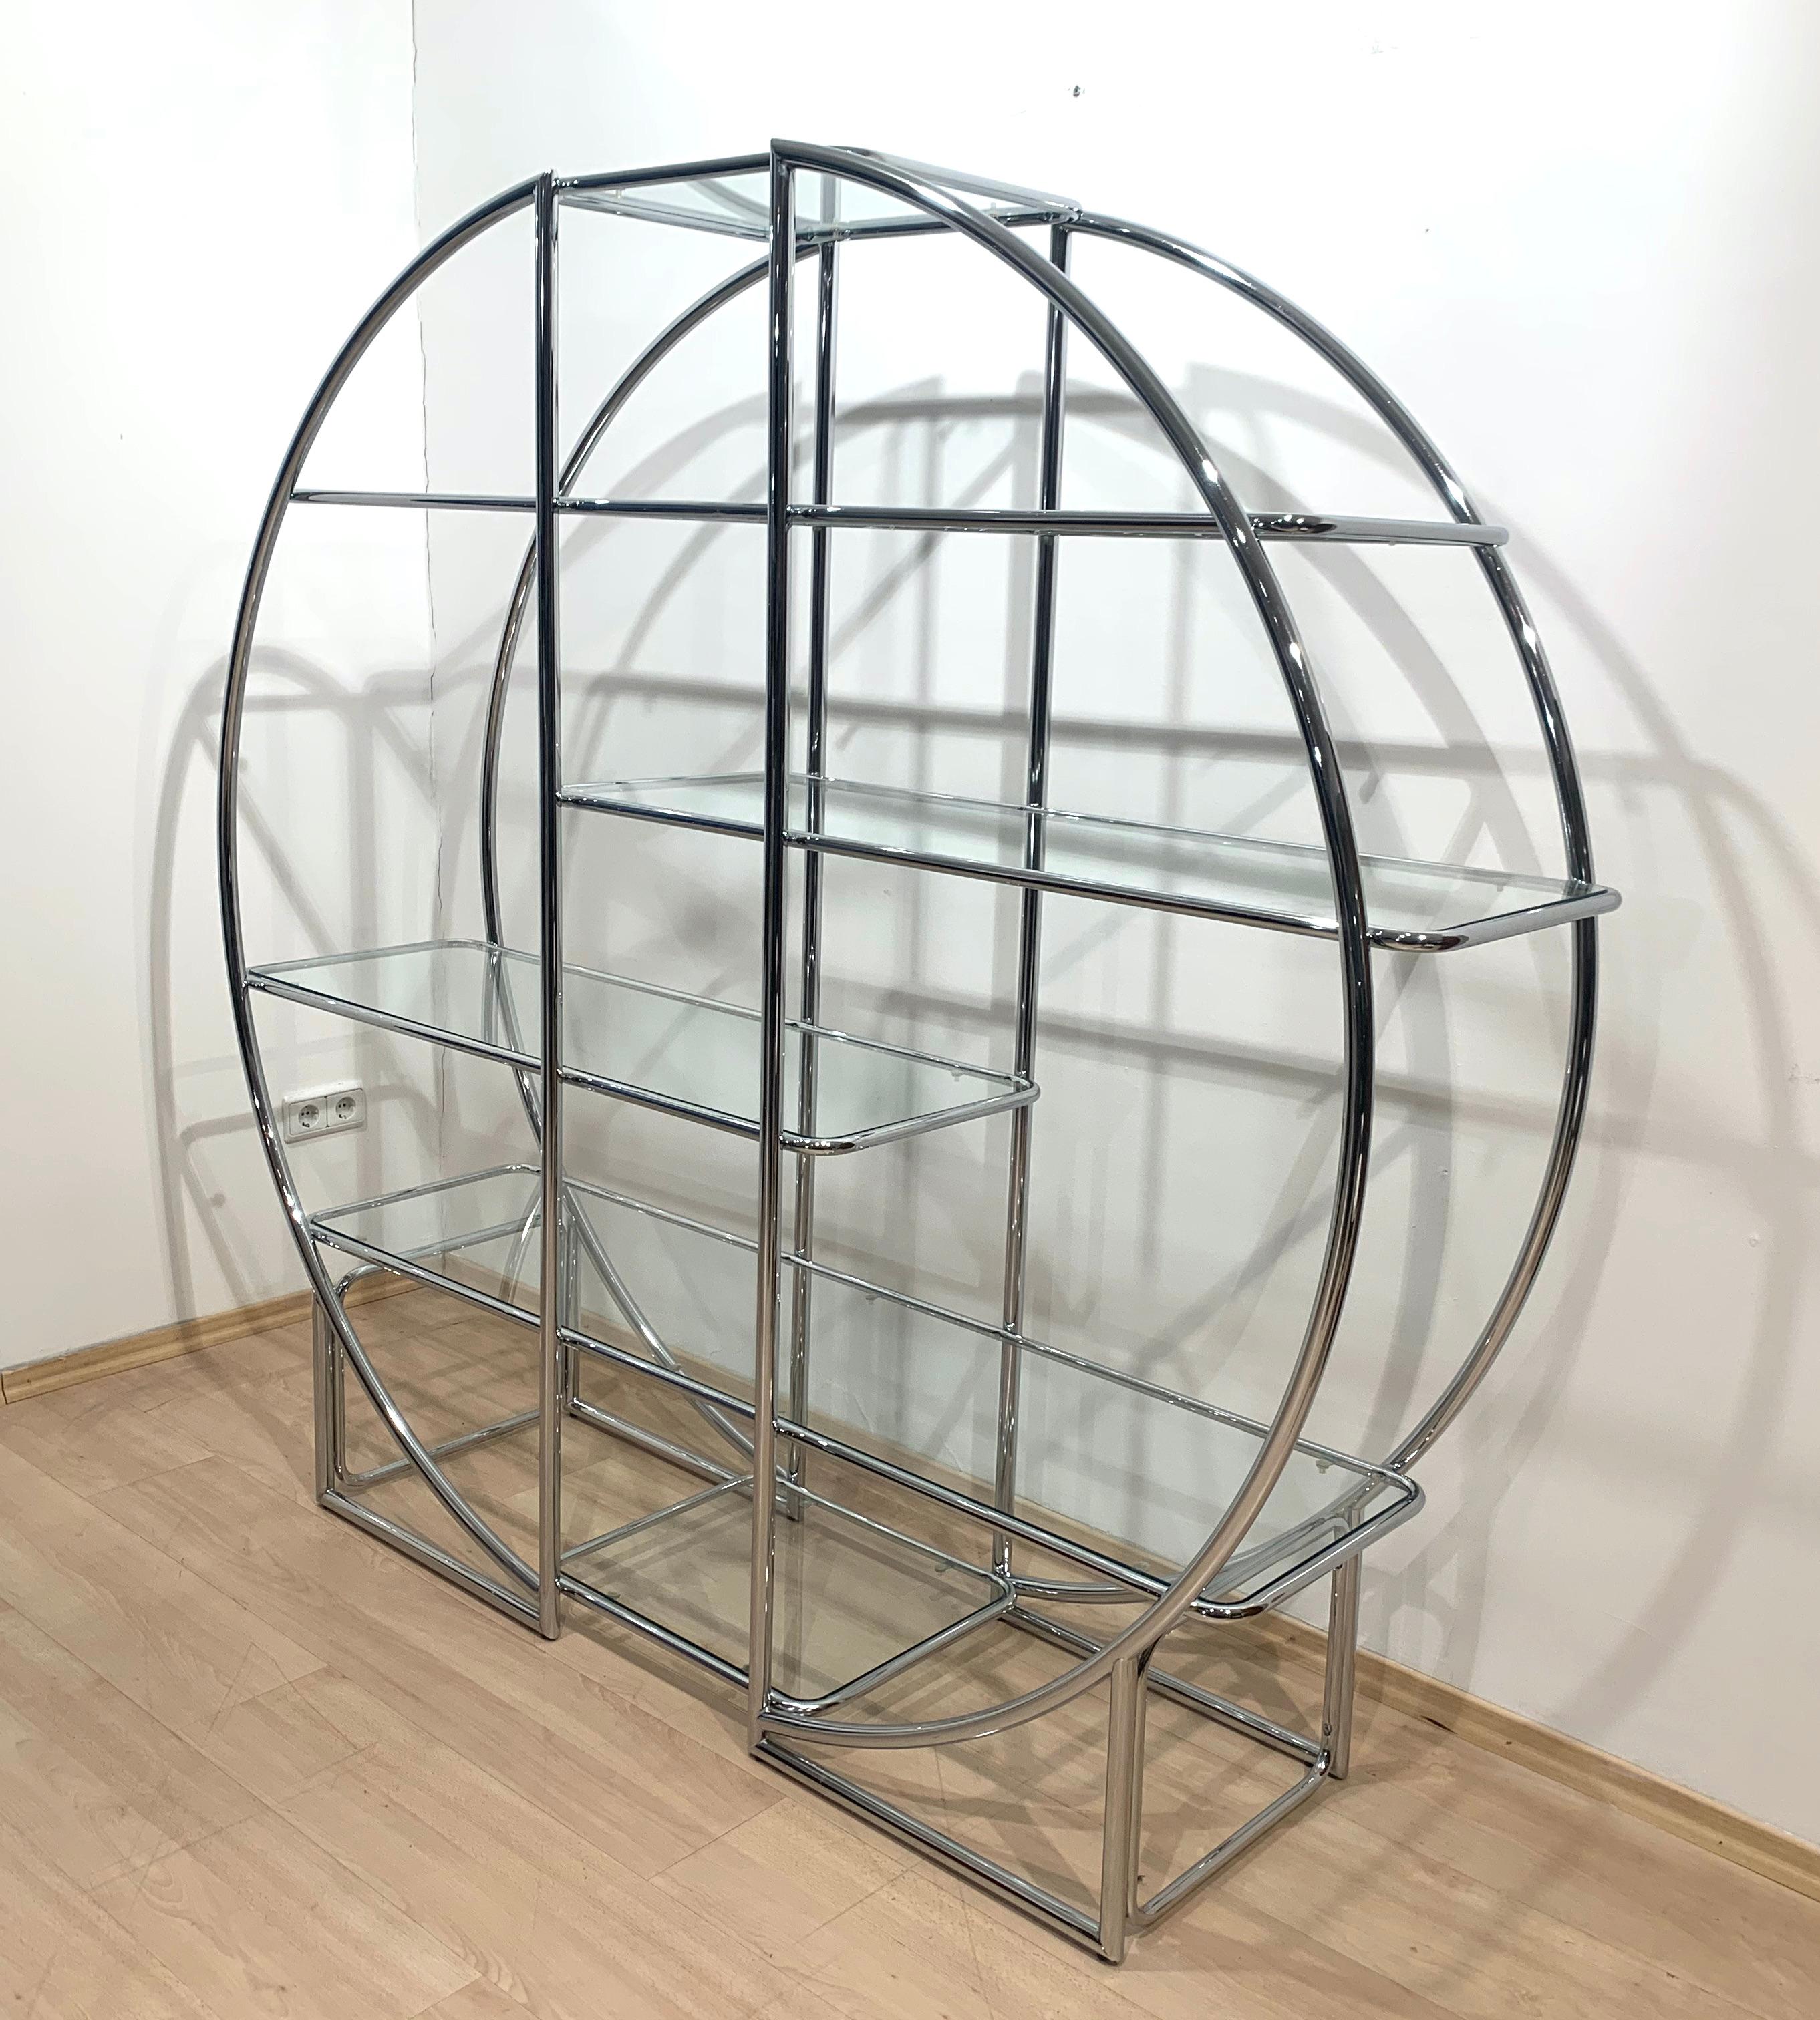 Galvanized Bauhaus Style Shelf, Chromed Steeltubes and Glass, Germany, 1950-70s For Sale